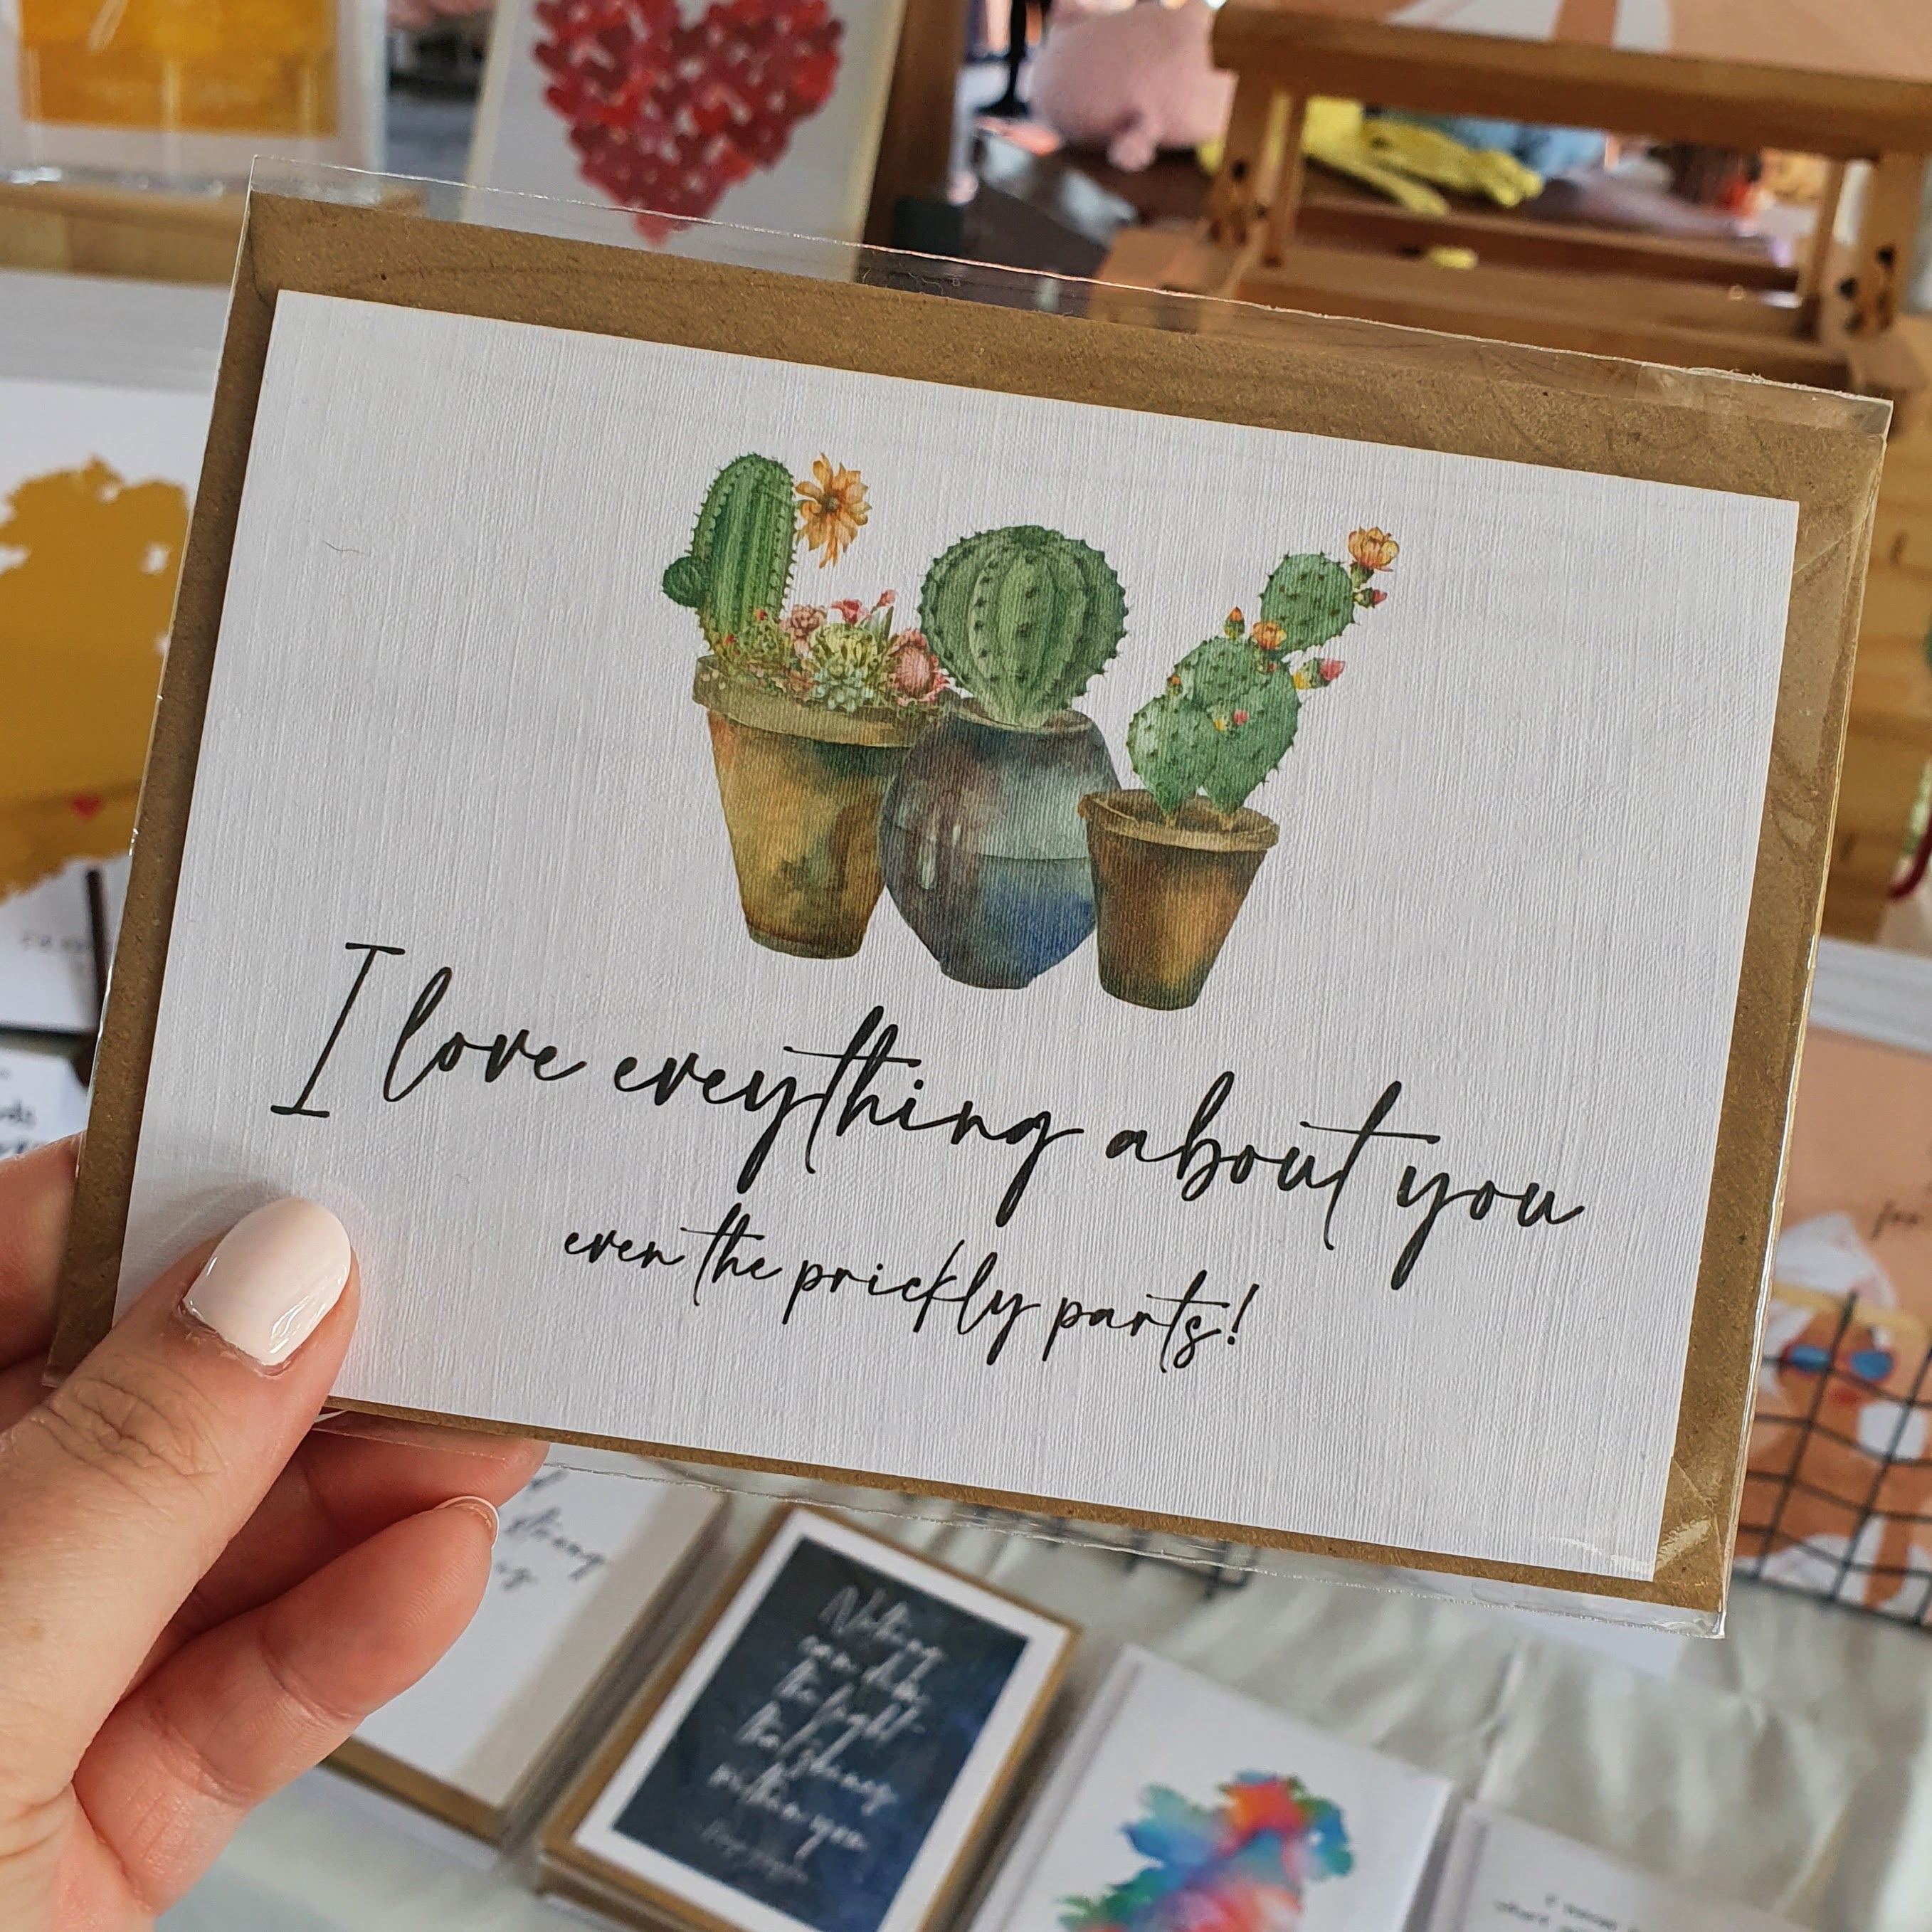 Even The Prickly Parts! - Greeting Card